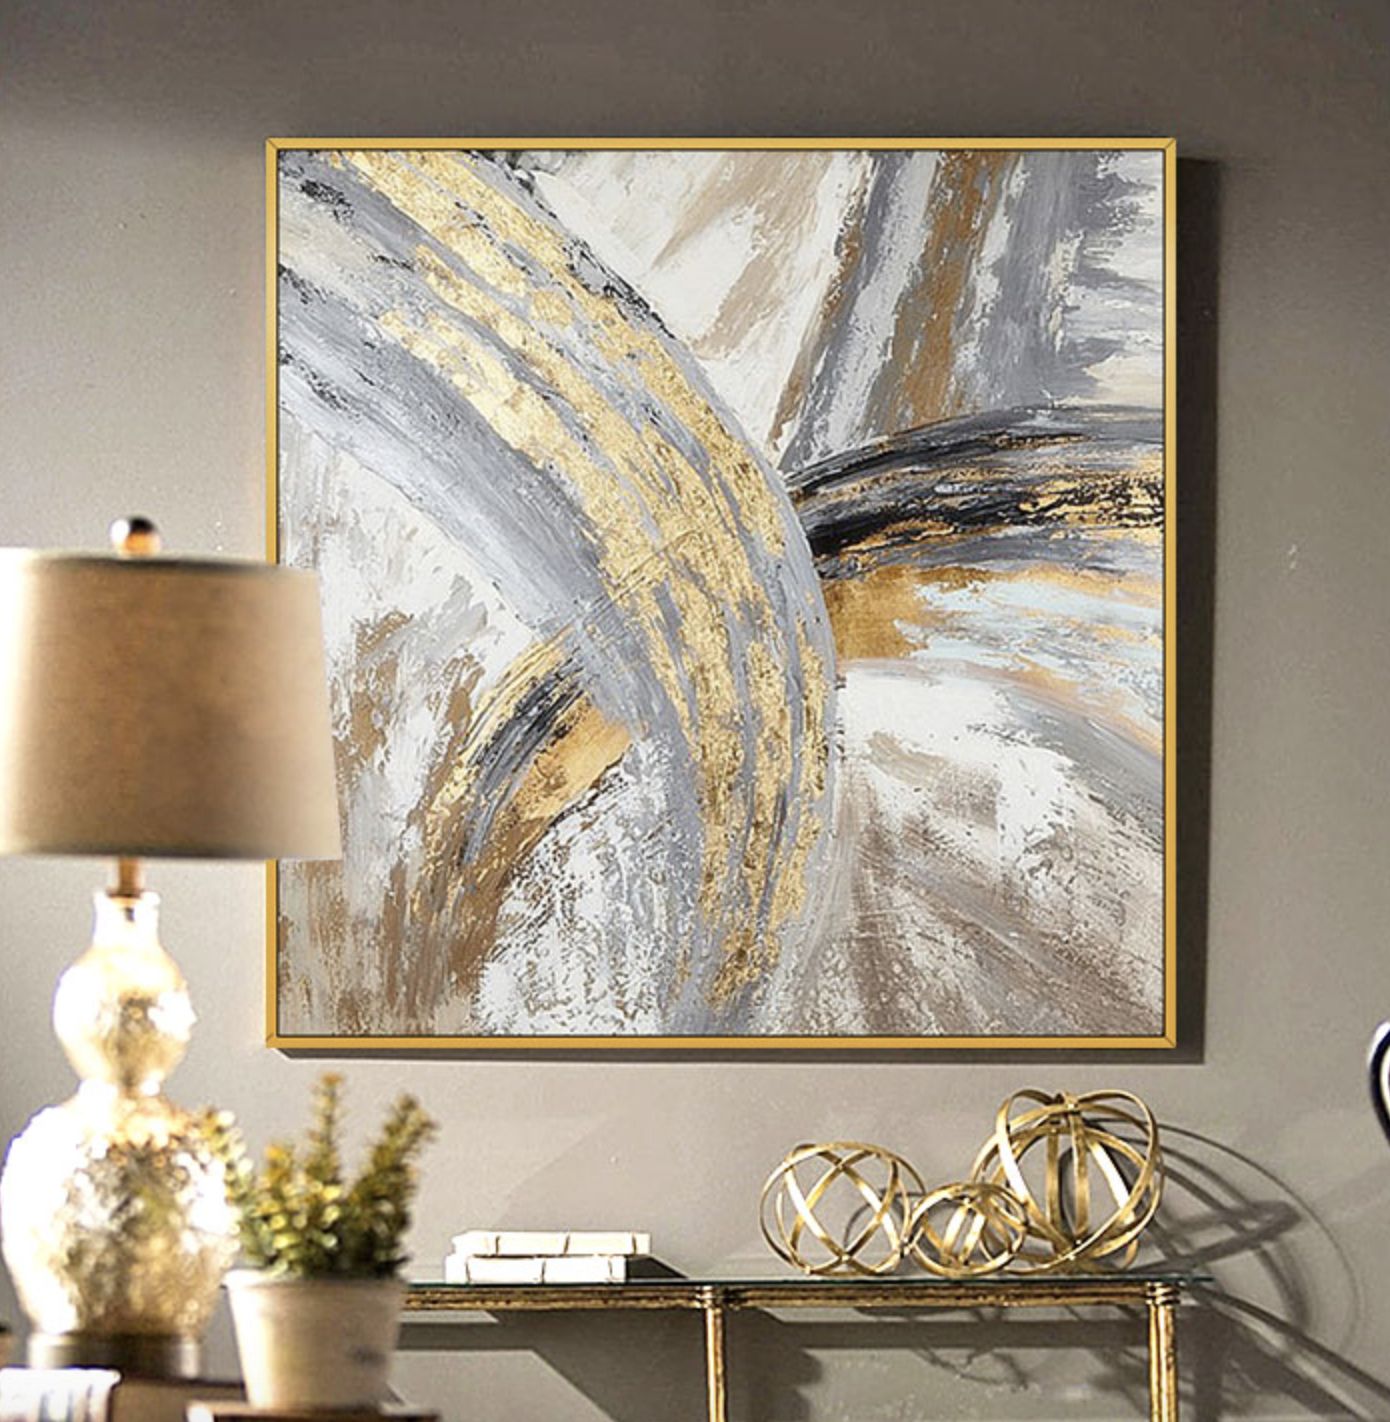 75x75cm Handmade Gold Framed Gold Color Modern Decoration Wall Art On Canvas  – Buy Wall Art On Canvas,decoration Wall Art On Canvas,modern Wall Art On  Canvas Product On Alibaba Regarding Golden Wall Art (View 7 of 15)